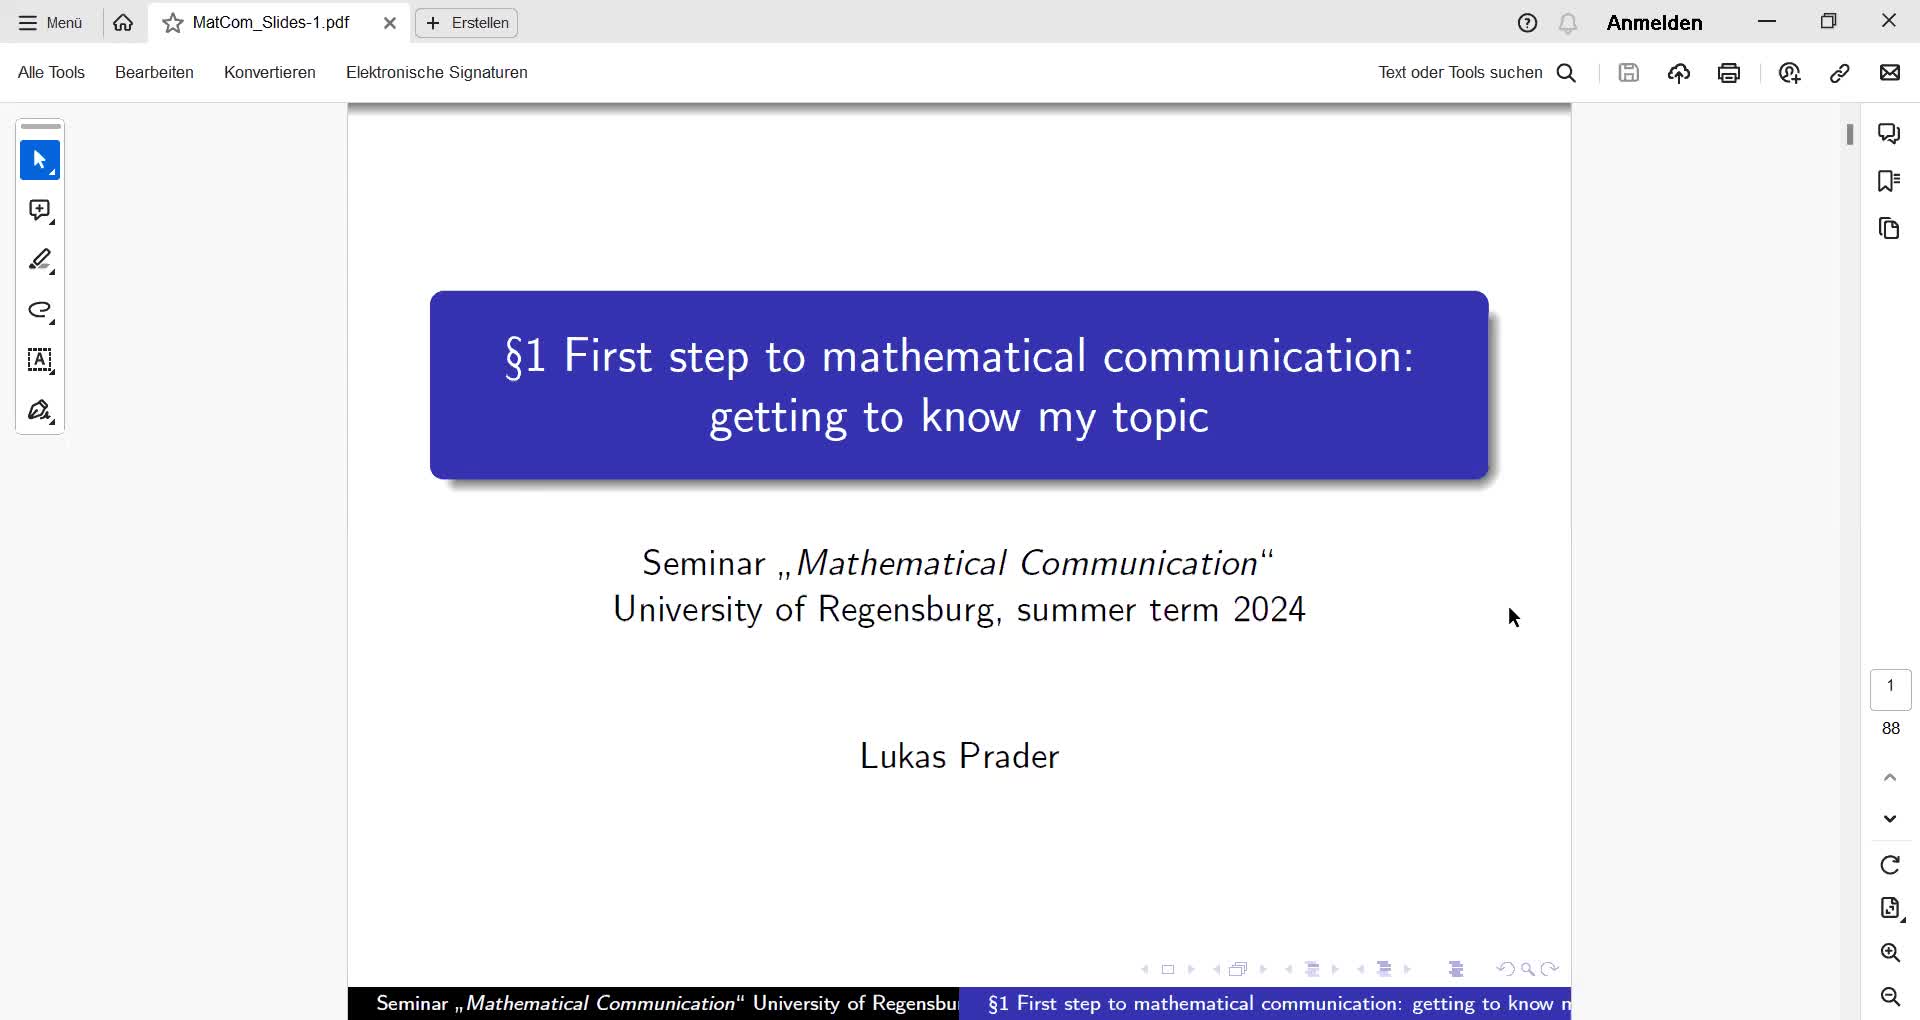 §1 First step to mathematical communication: getting to know my topic